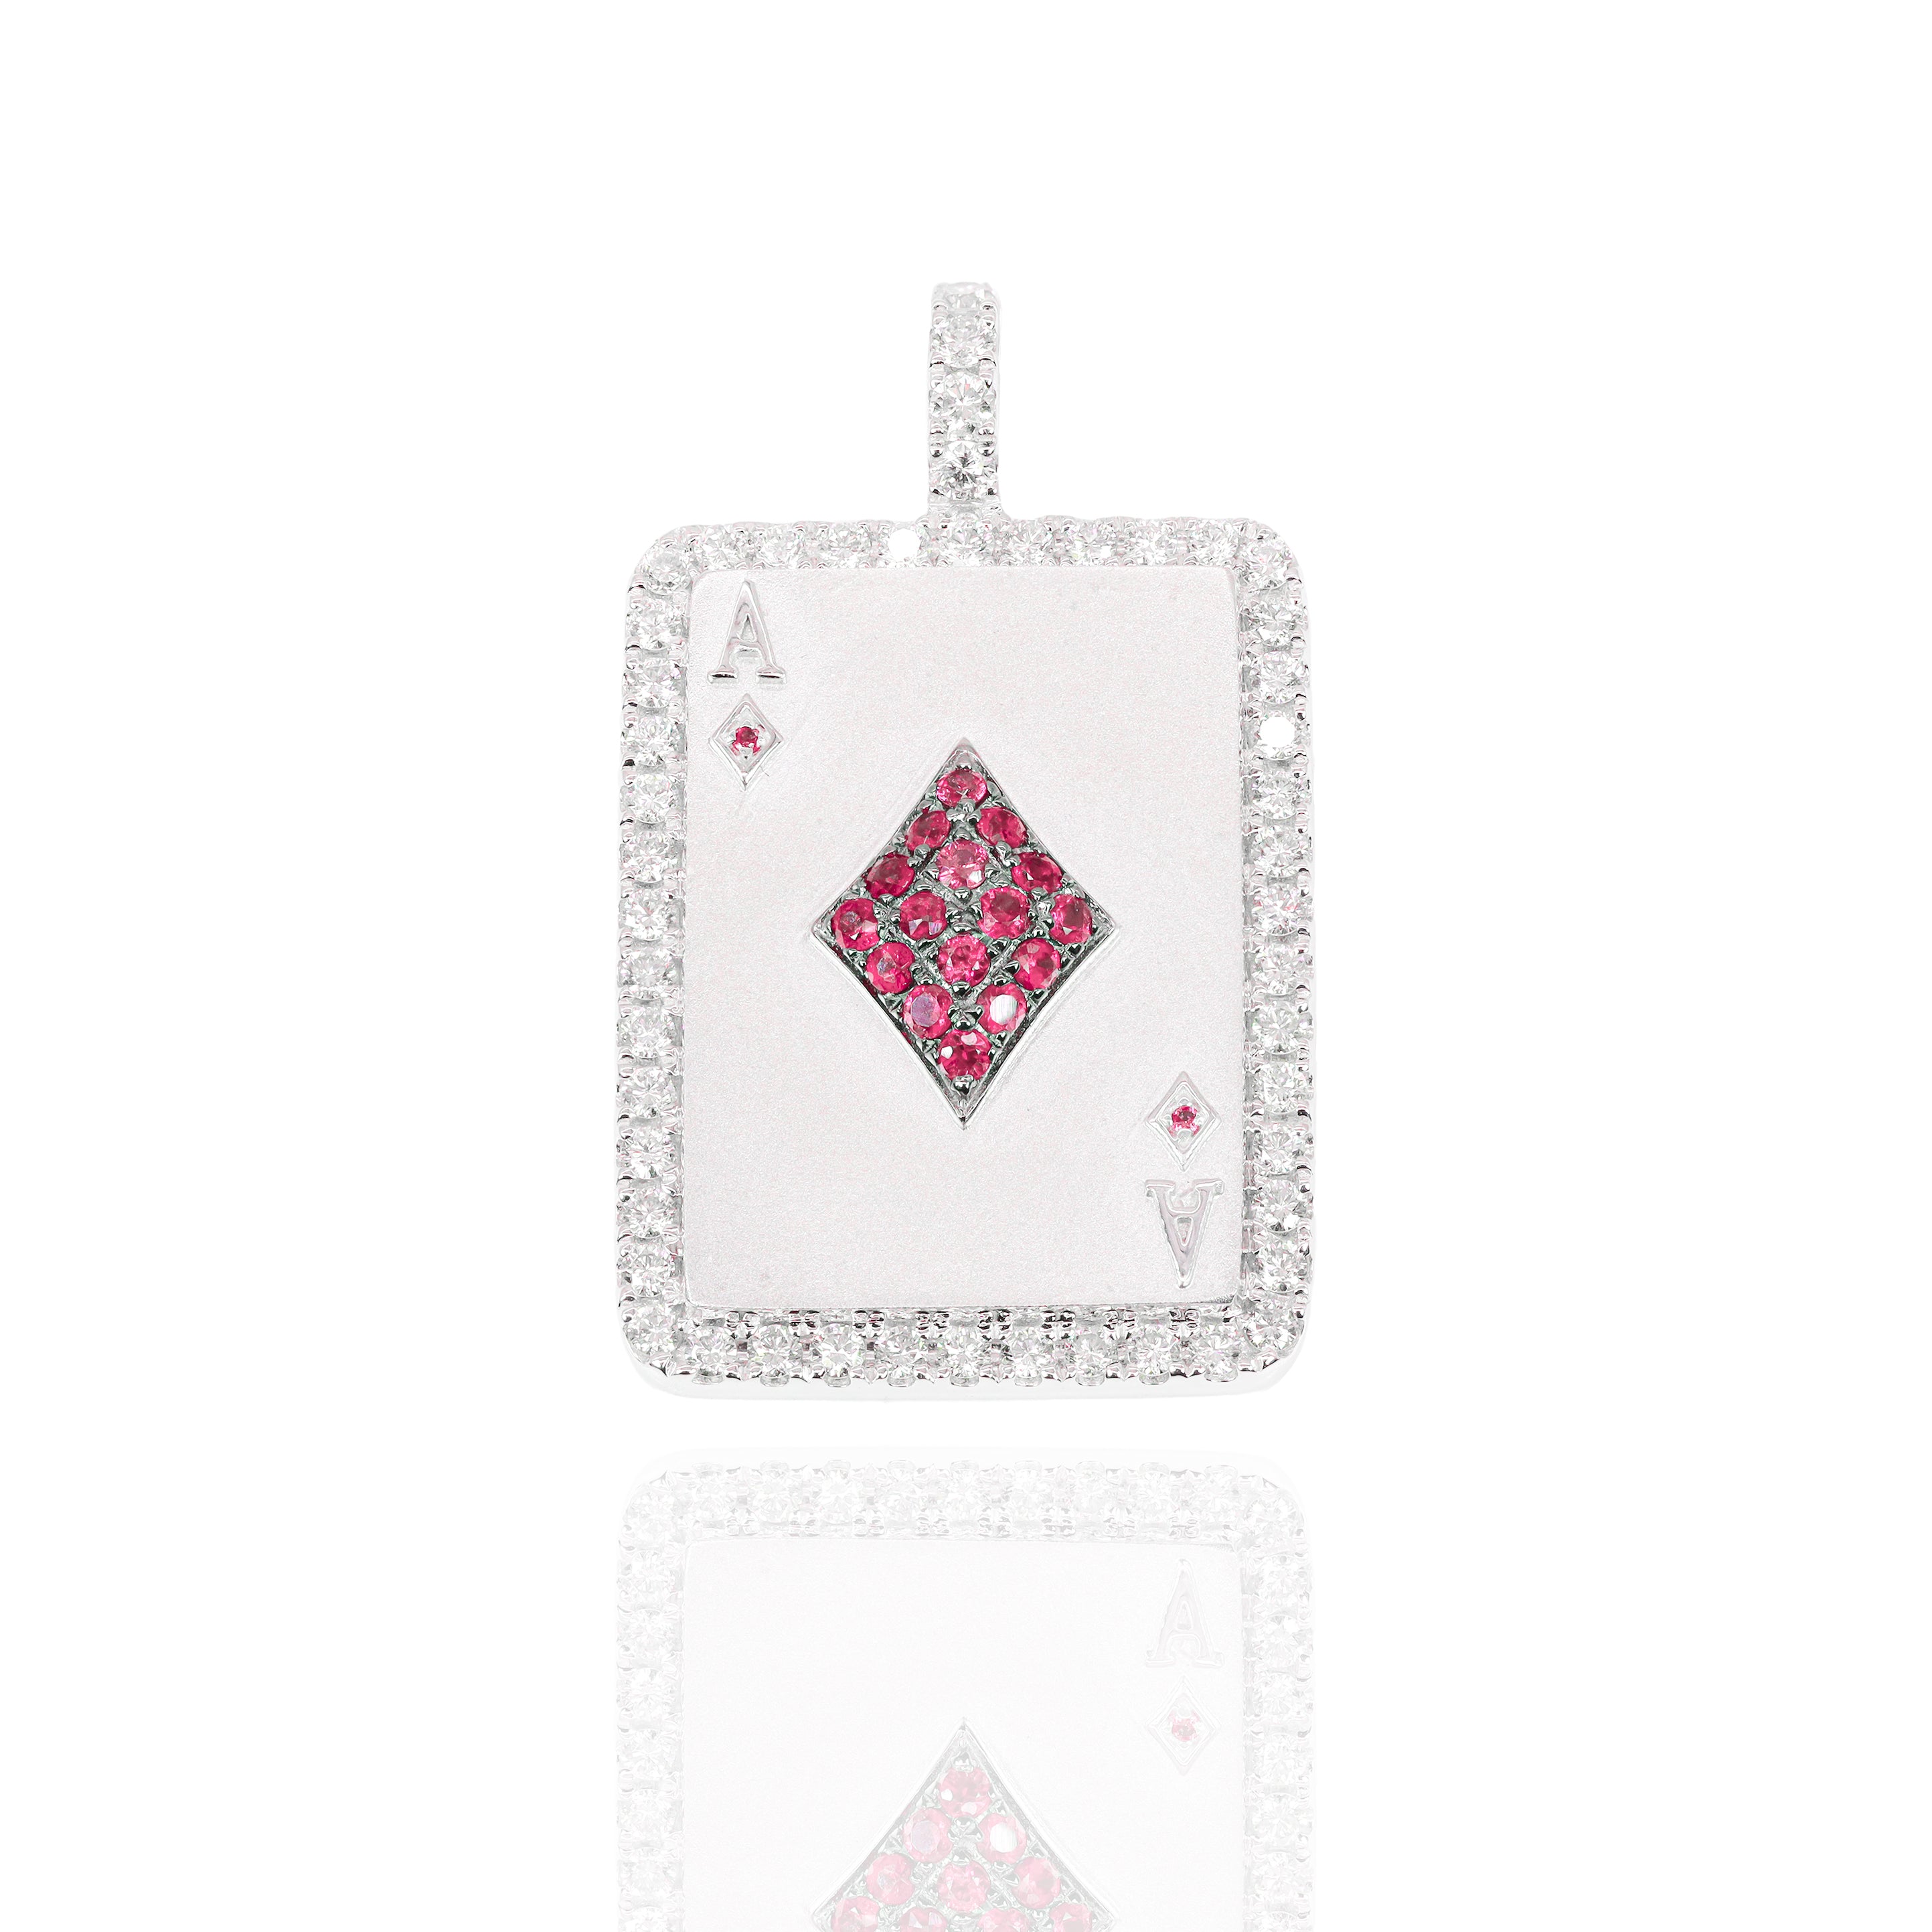 Ace of Diamonds Pendant with Red Rubies